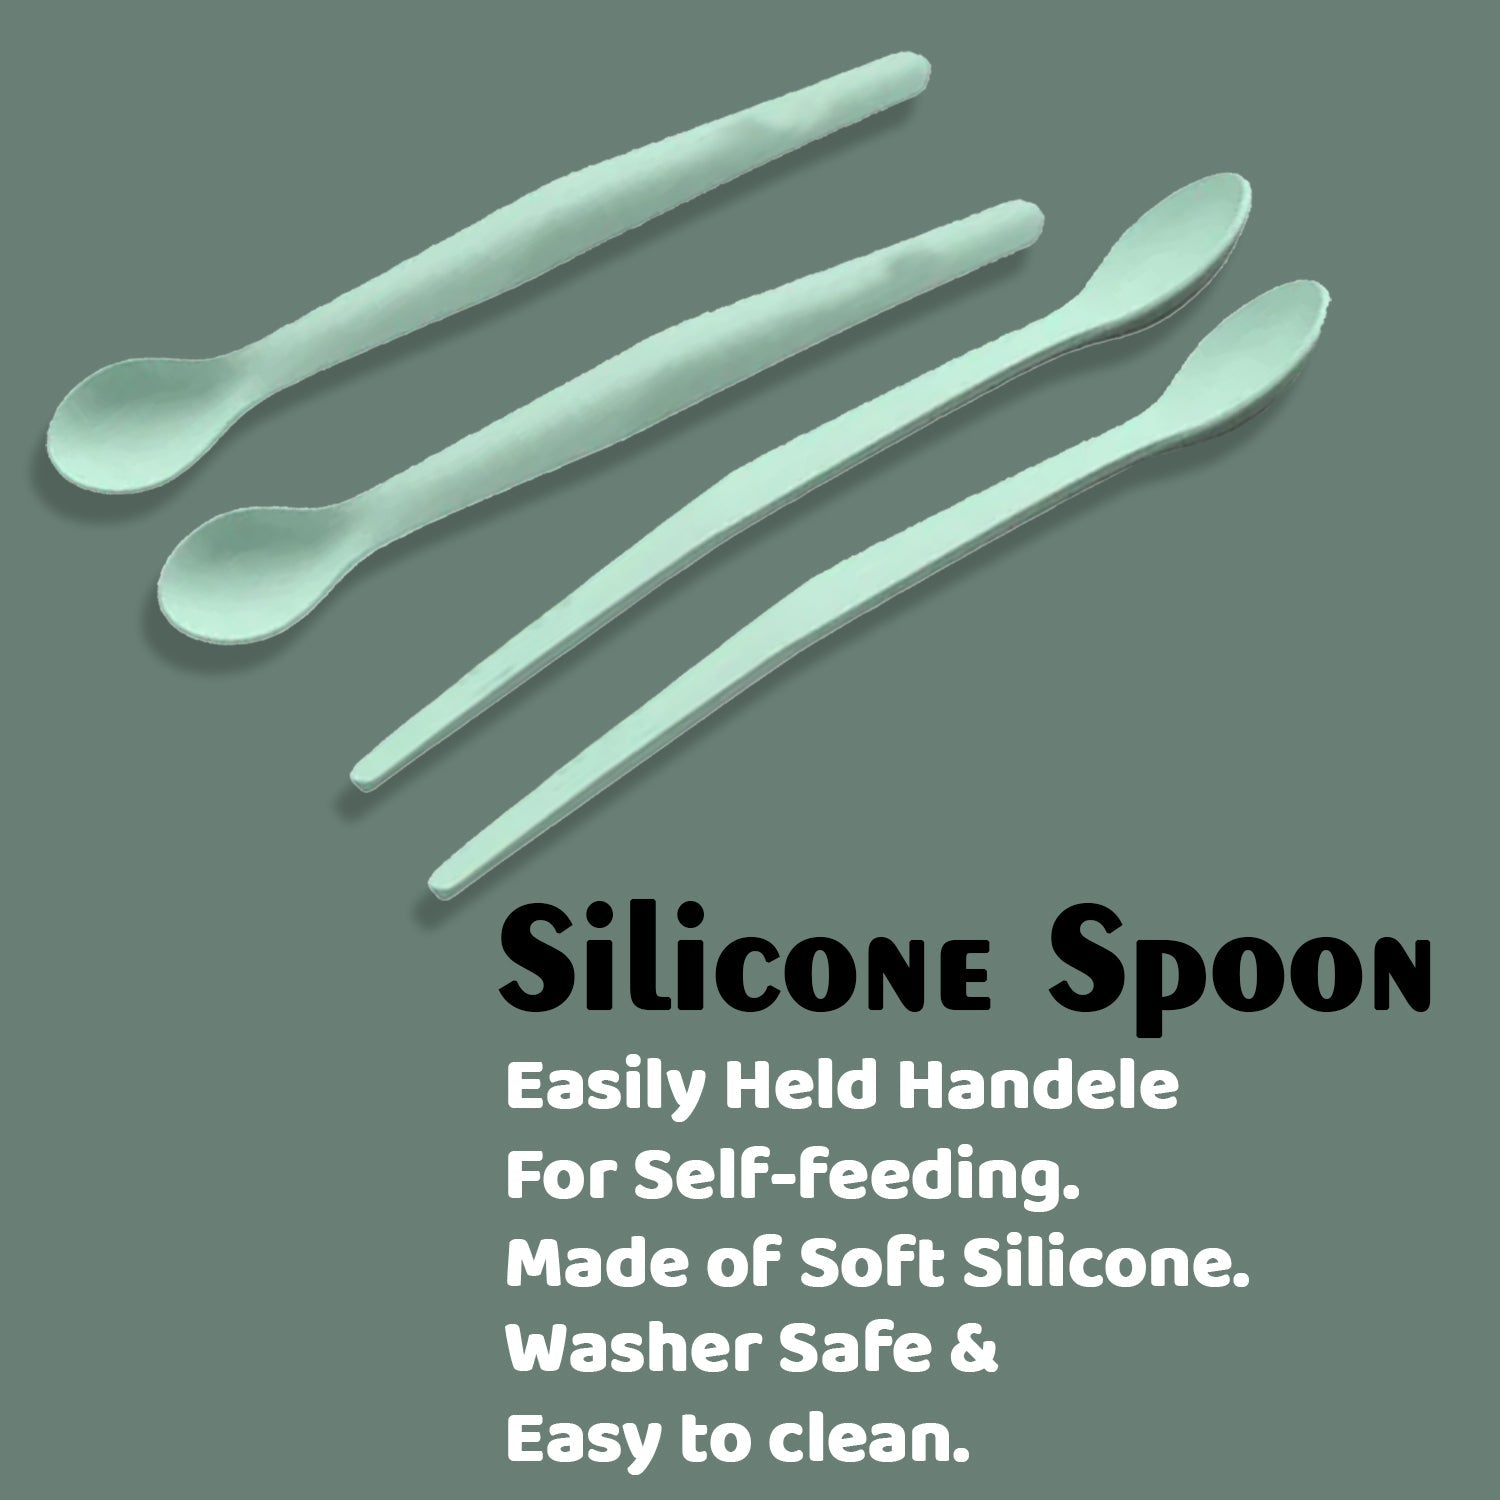 2024 Small Silicone Spoons Nonstick Kitchen Spoon Silicone Serving Spoon Stirring Spoon for Kitchen Cooking Baking Stirring Mixing Tools DukanDaily